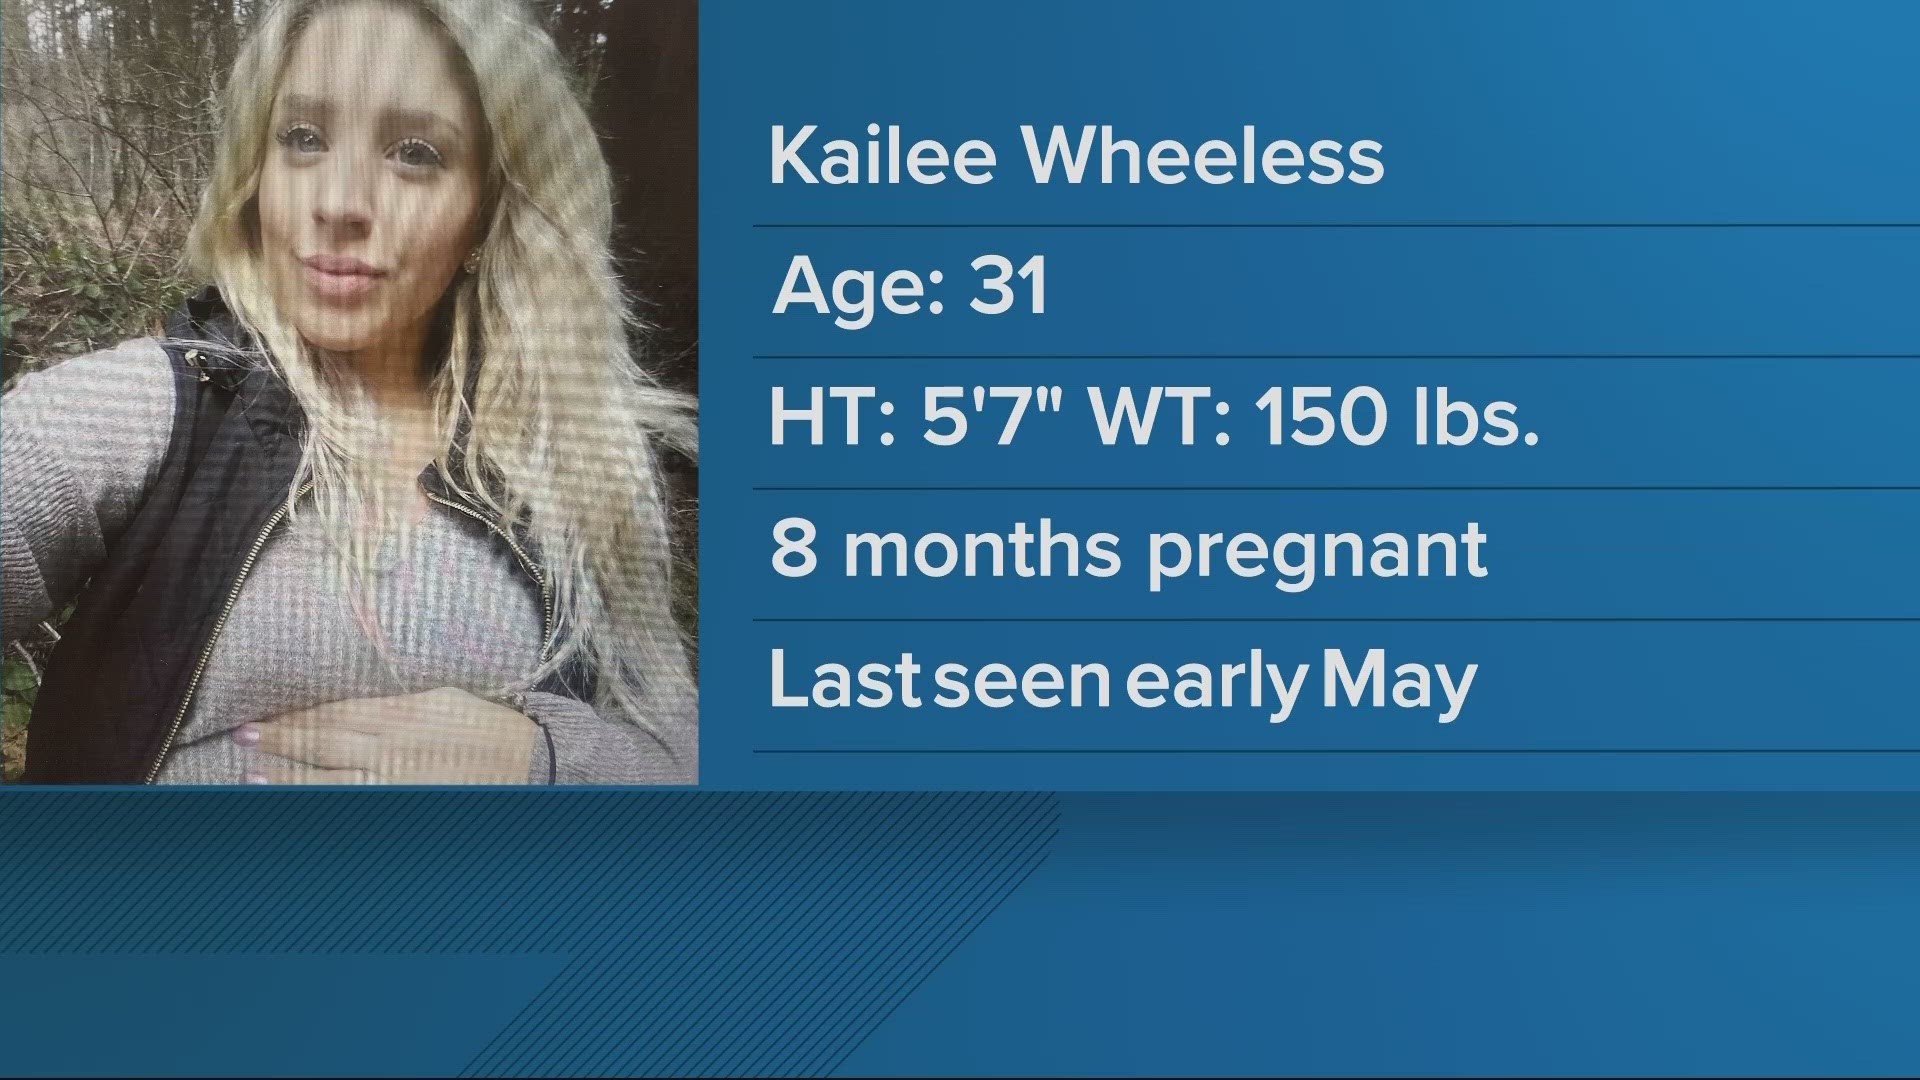 Kailee Wheeless, 31 is believed to be eight months pregnant and houseless. She could be suffering from medical complications dangerous to her and the unborn child.